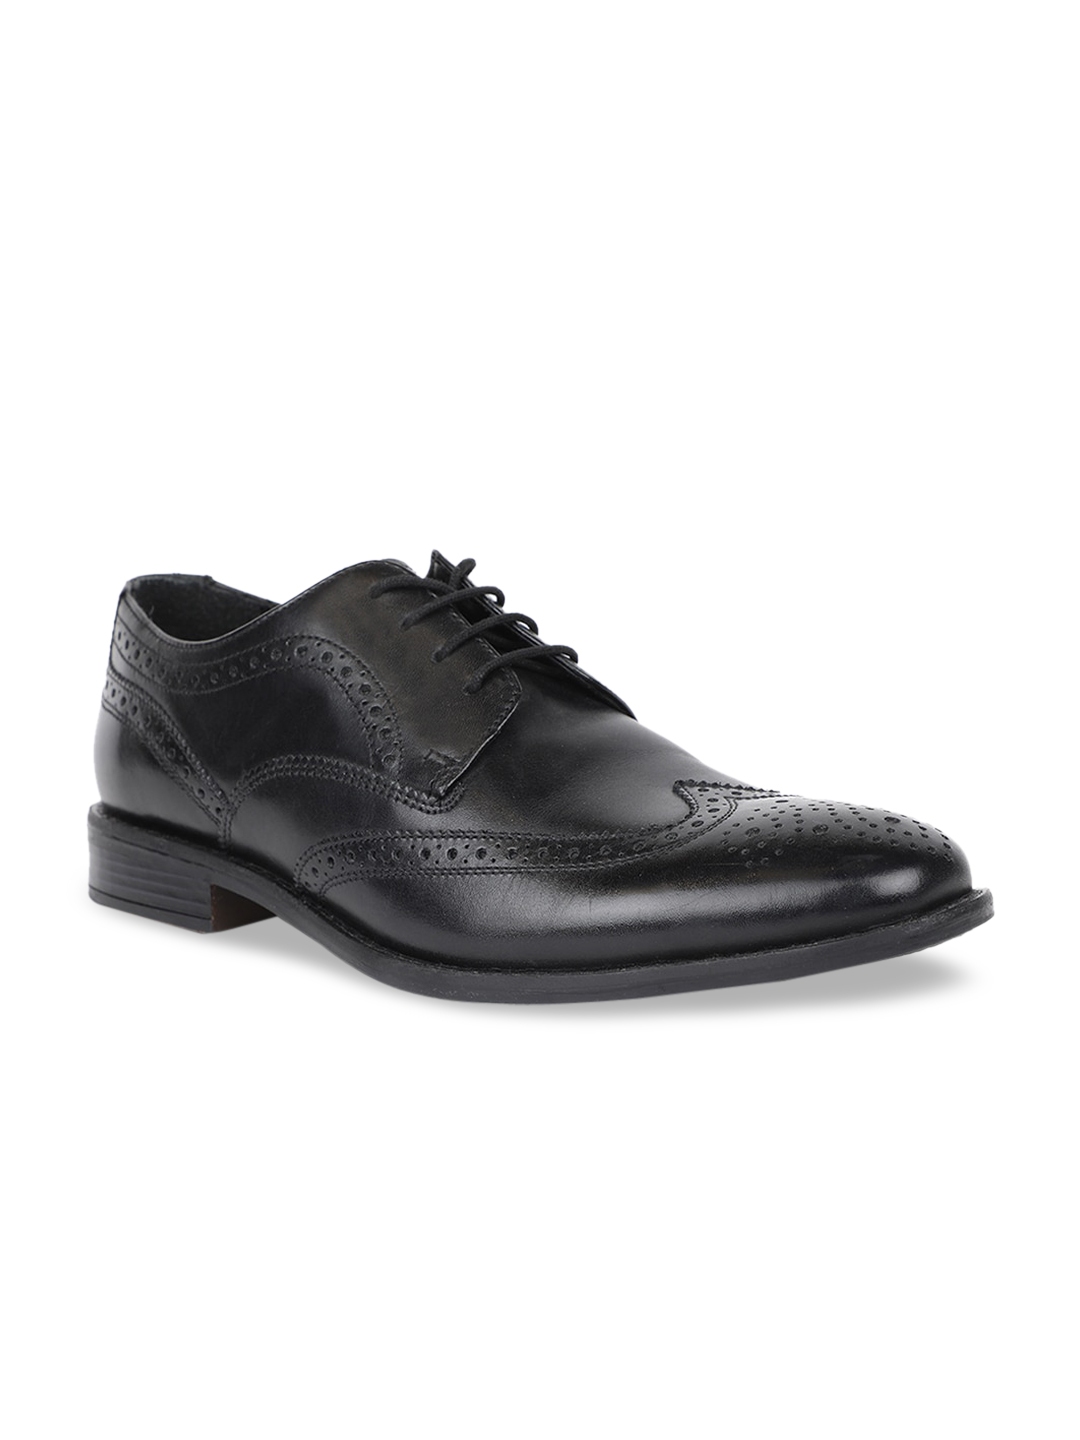 Buy Hush Puppies Men Black Solid Formal Leather Brogues - Formal Shoes ...